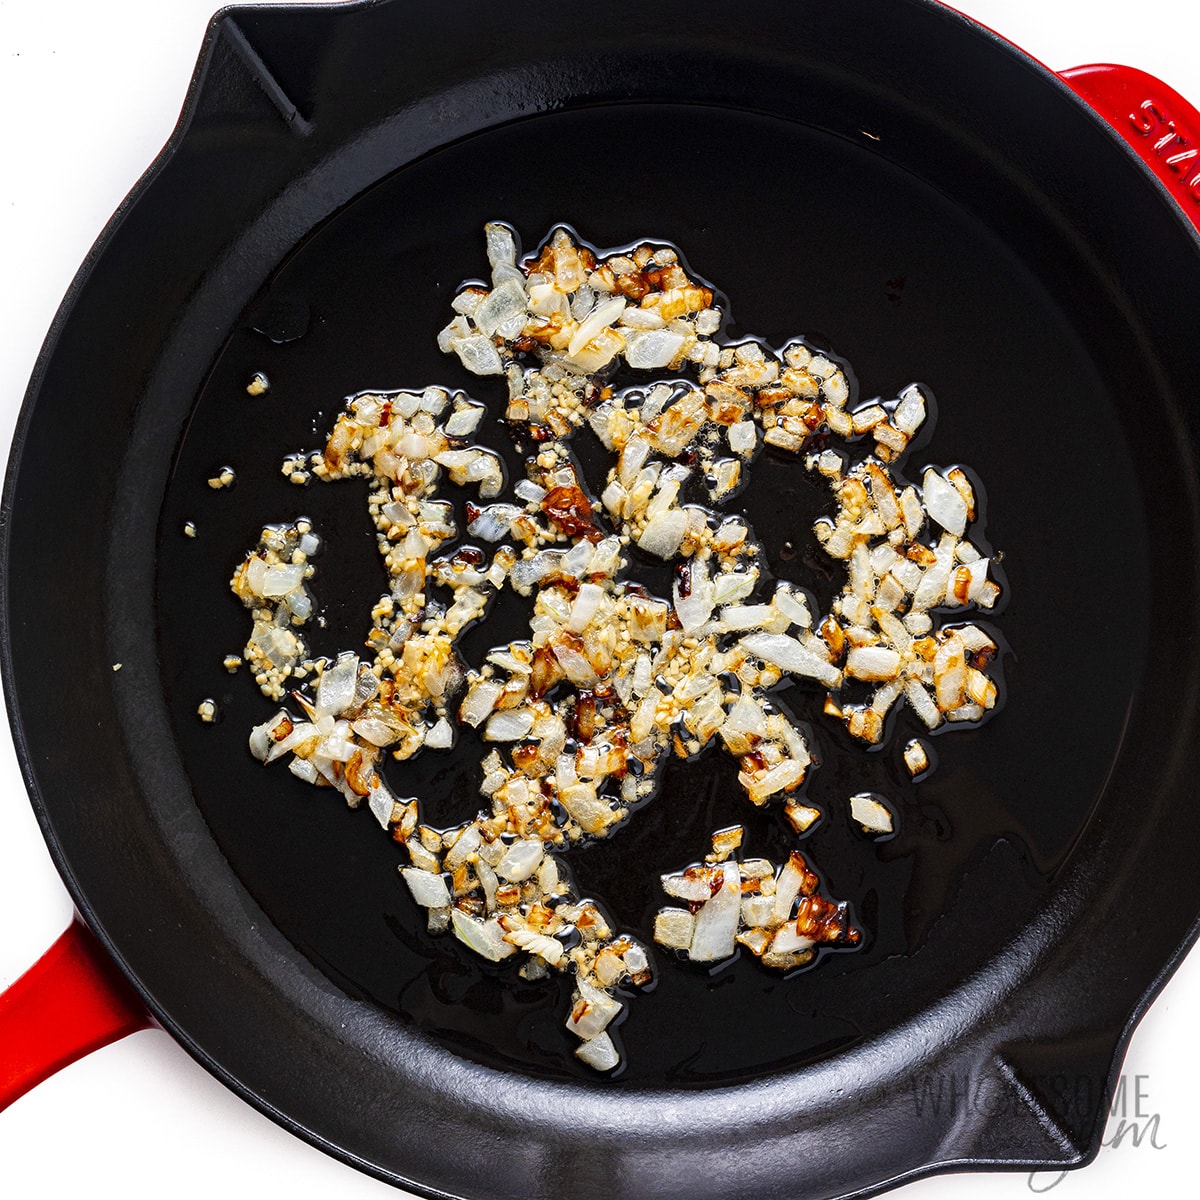 Sauteed garlic and onions in a skillet.